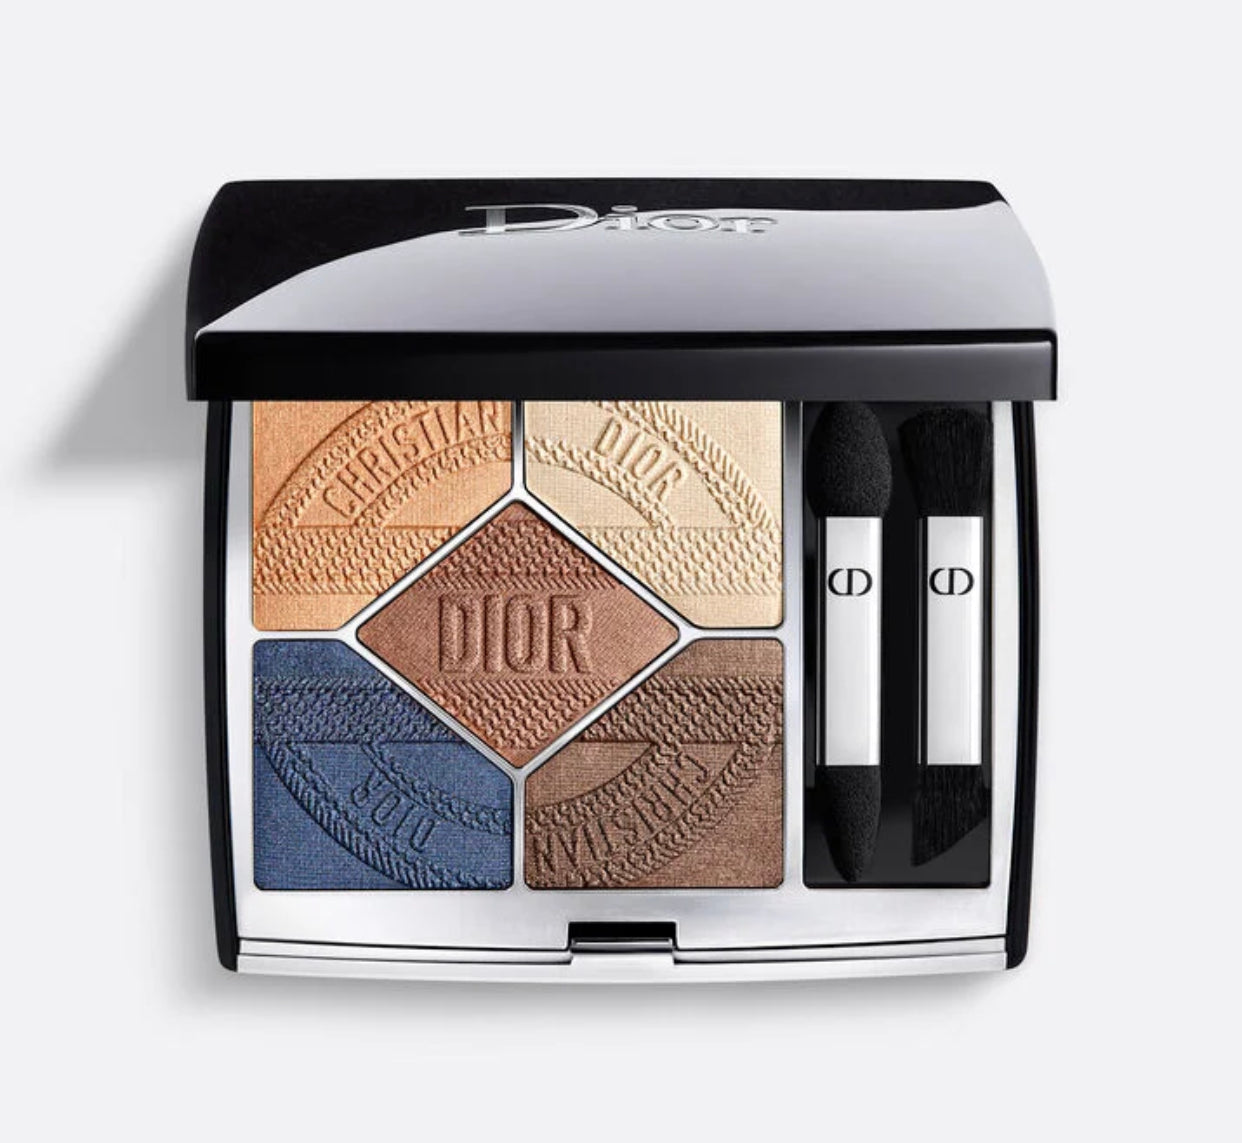 DIOR, 5 COULEURS COUTURE - LIMITED EDITION